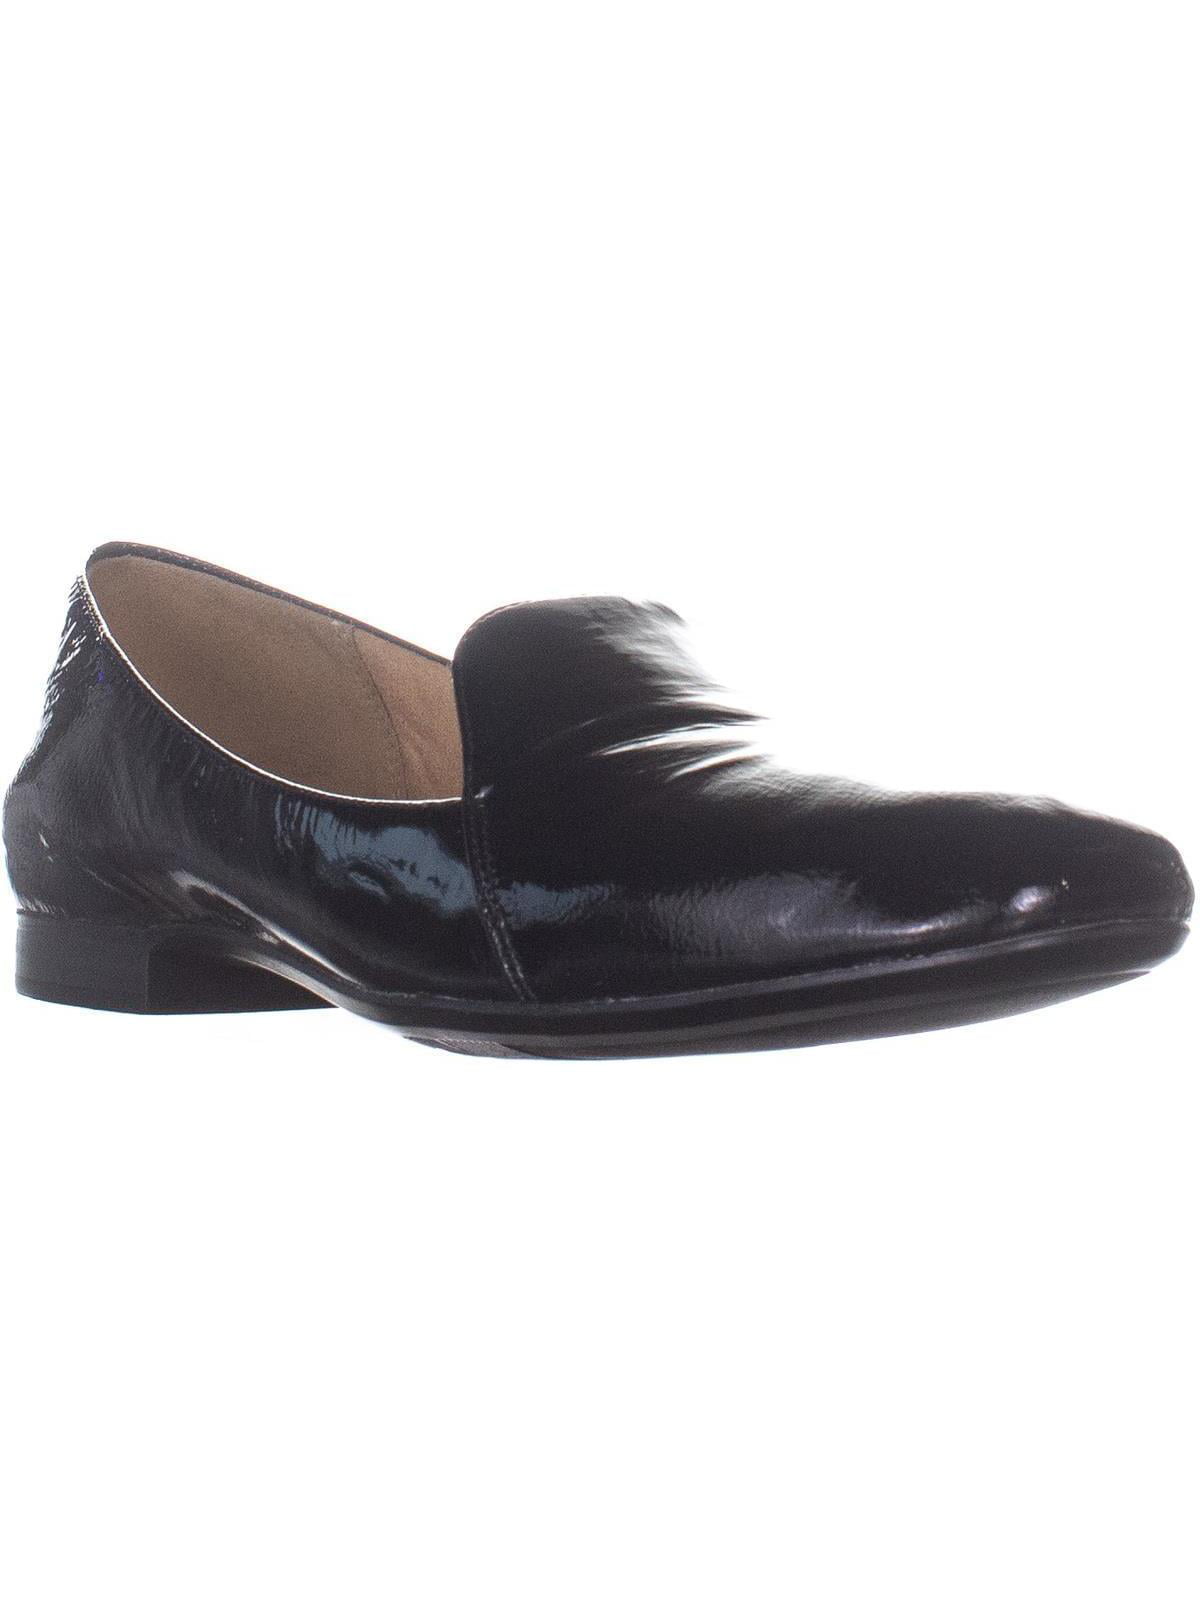 Womens naturalizer Emiline Classic Slip On Loafers, Black Patent ...